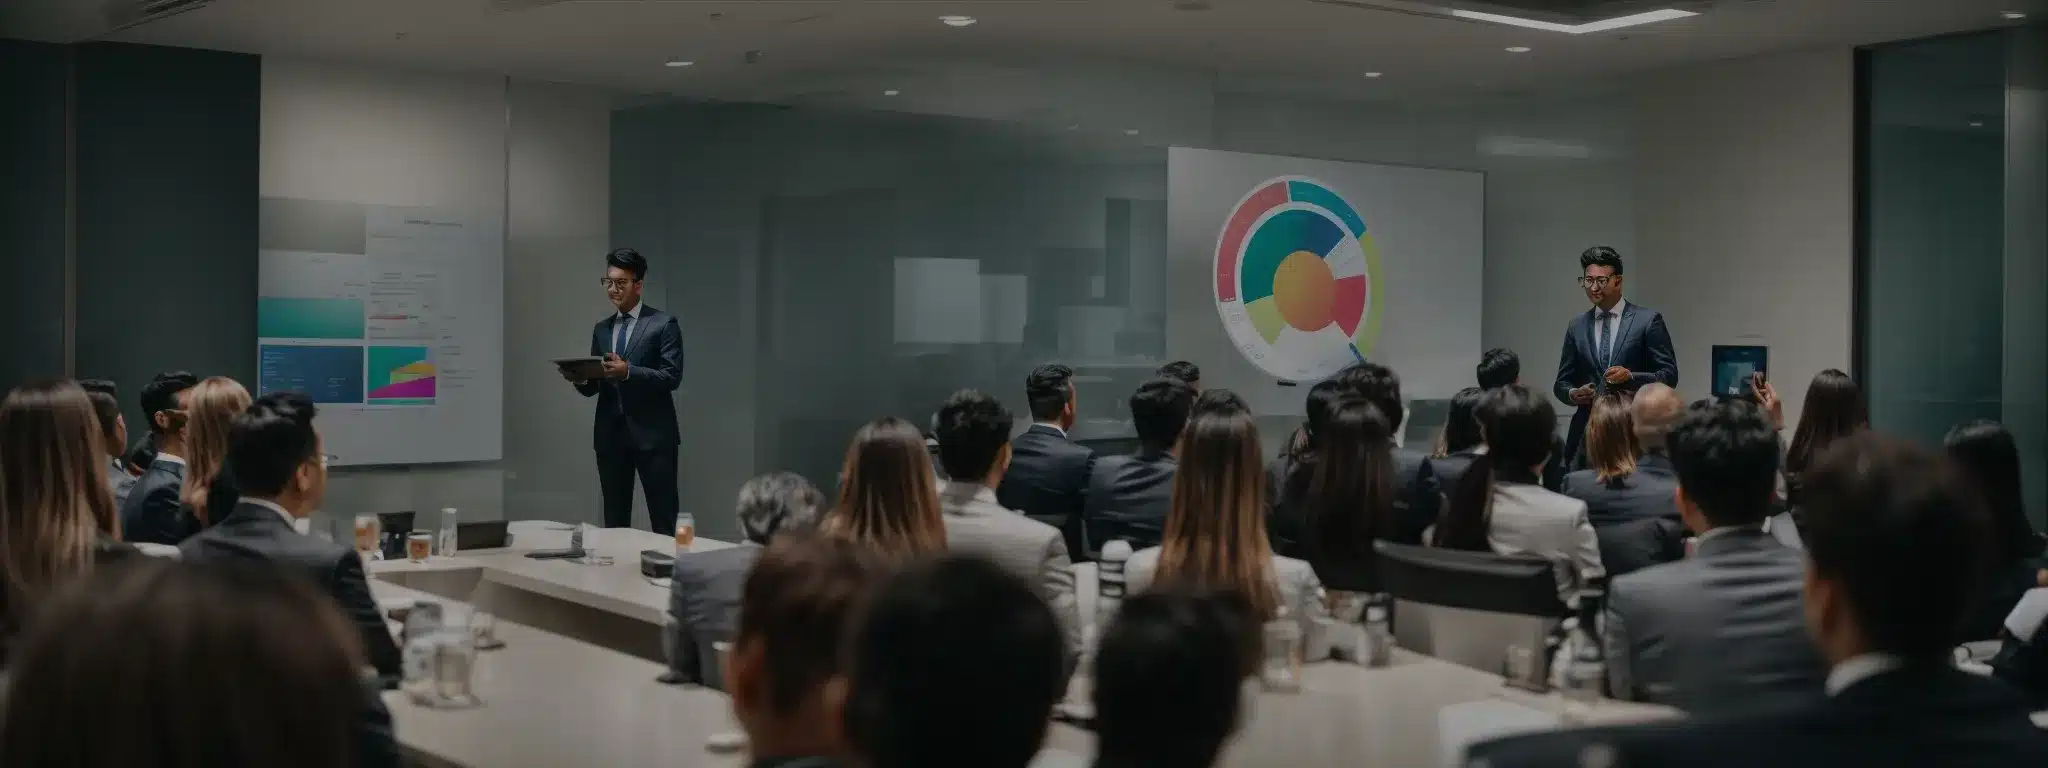 A Marketer Presents A Colorful Pie Chart To An Engaged Audience In A Modern Conference Room.